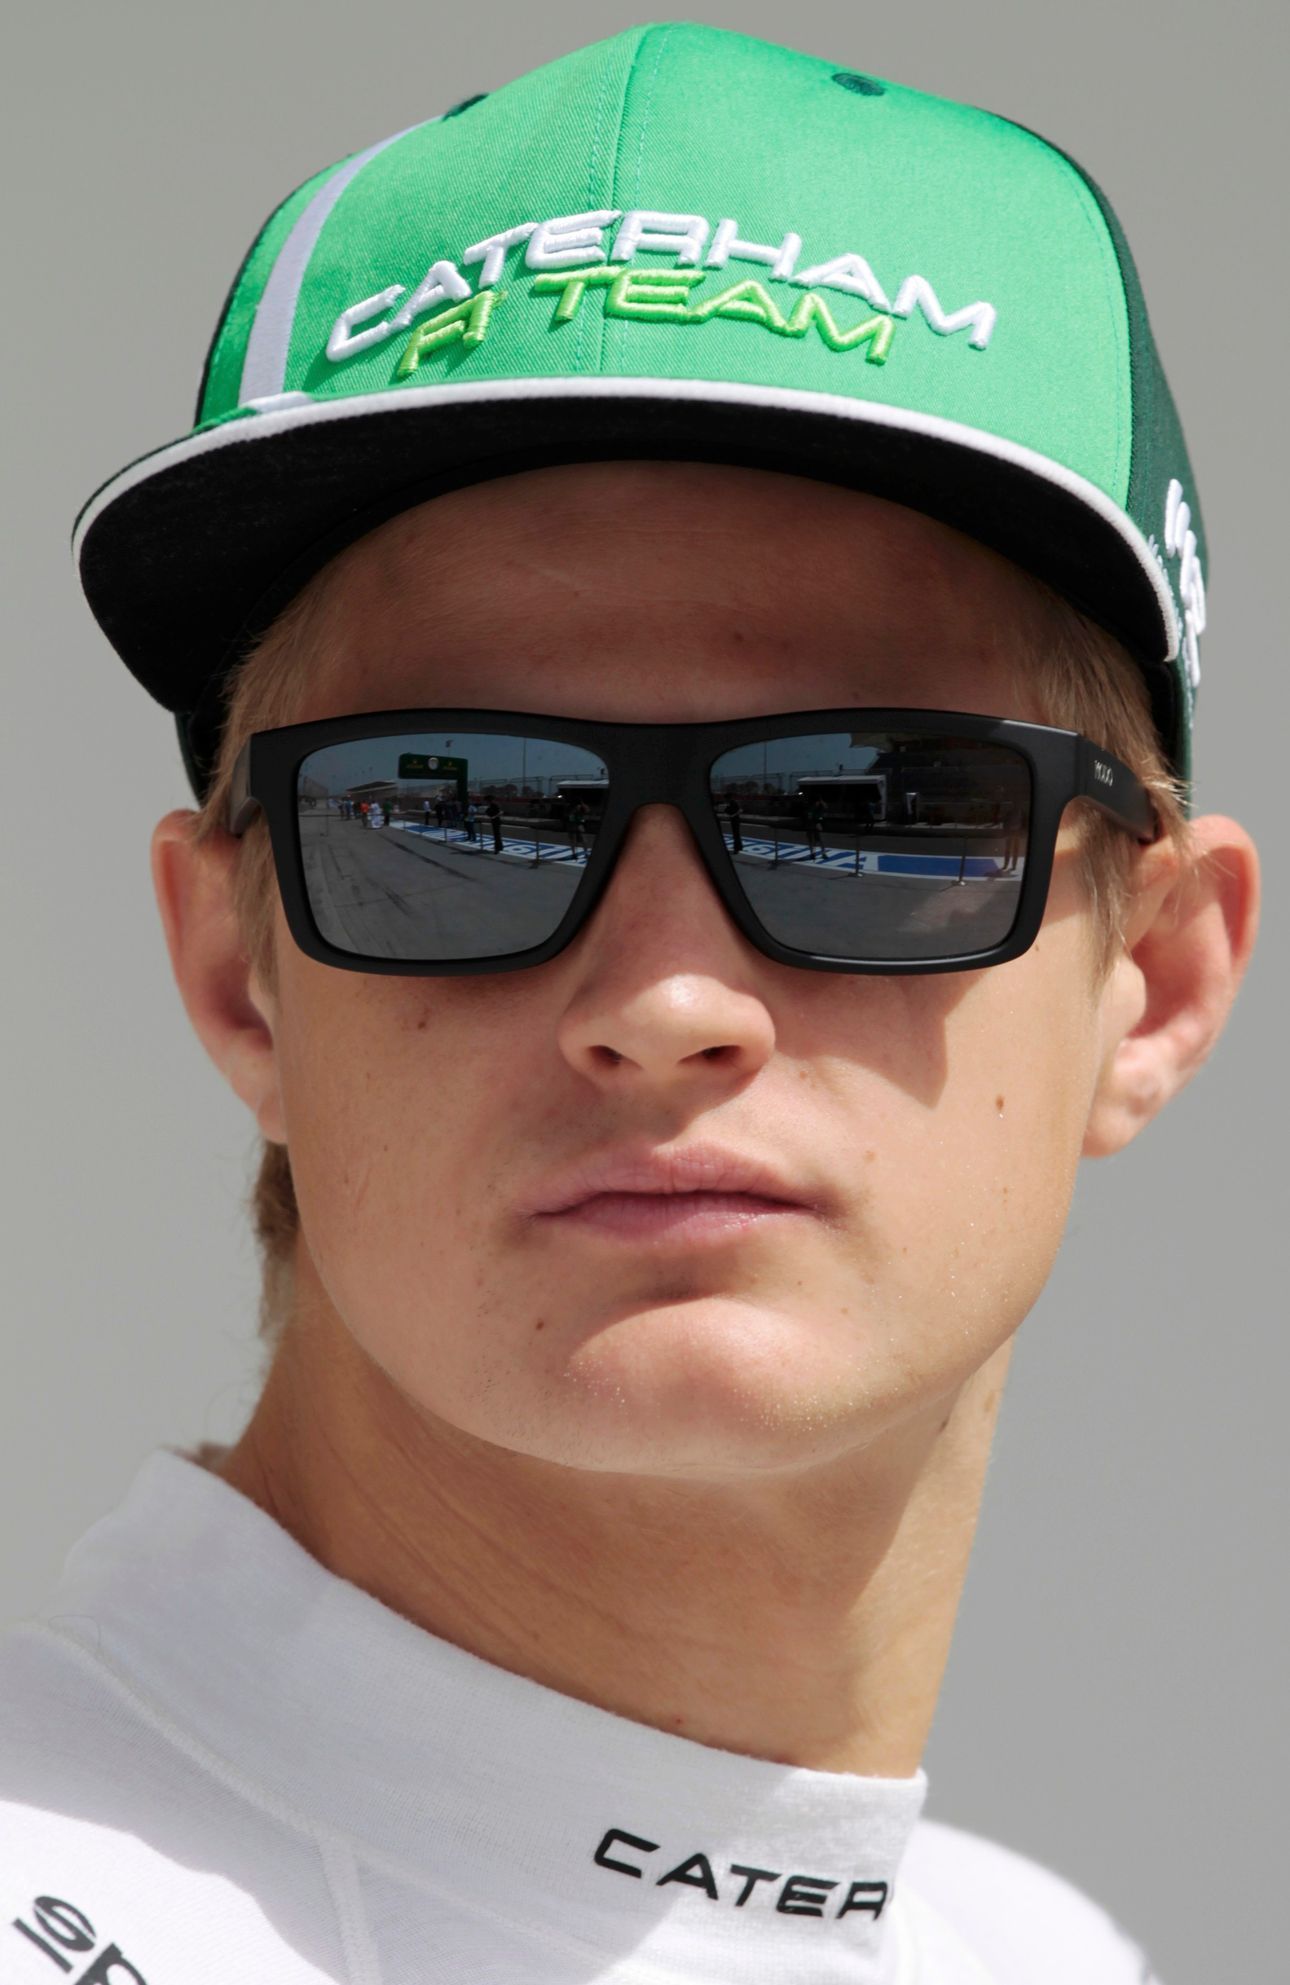 Caterham Formula One driver Marcus Ericsson of Sweden looks on during the first practice session of the Bahrain F1 Grand Prix at the Bahrain International Circuit (BIC) in Sakhir